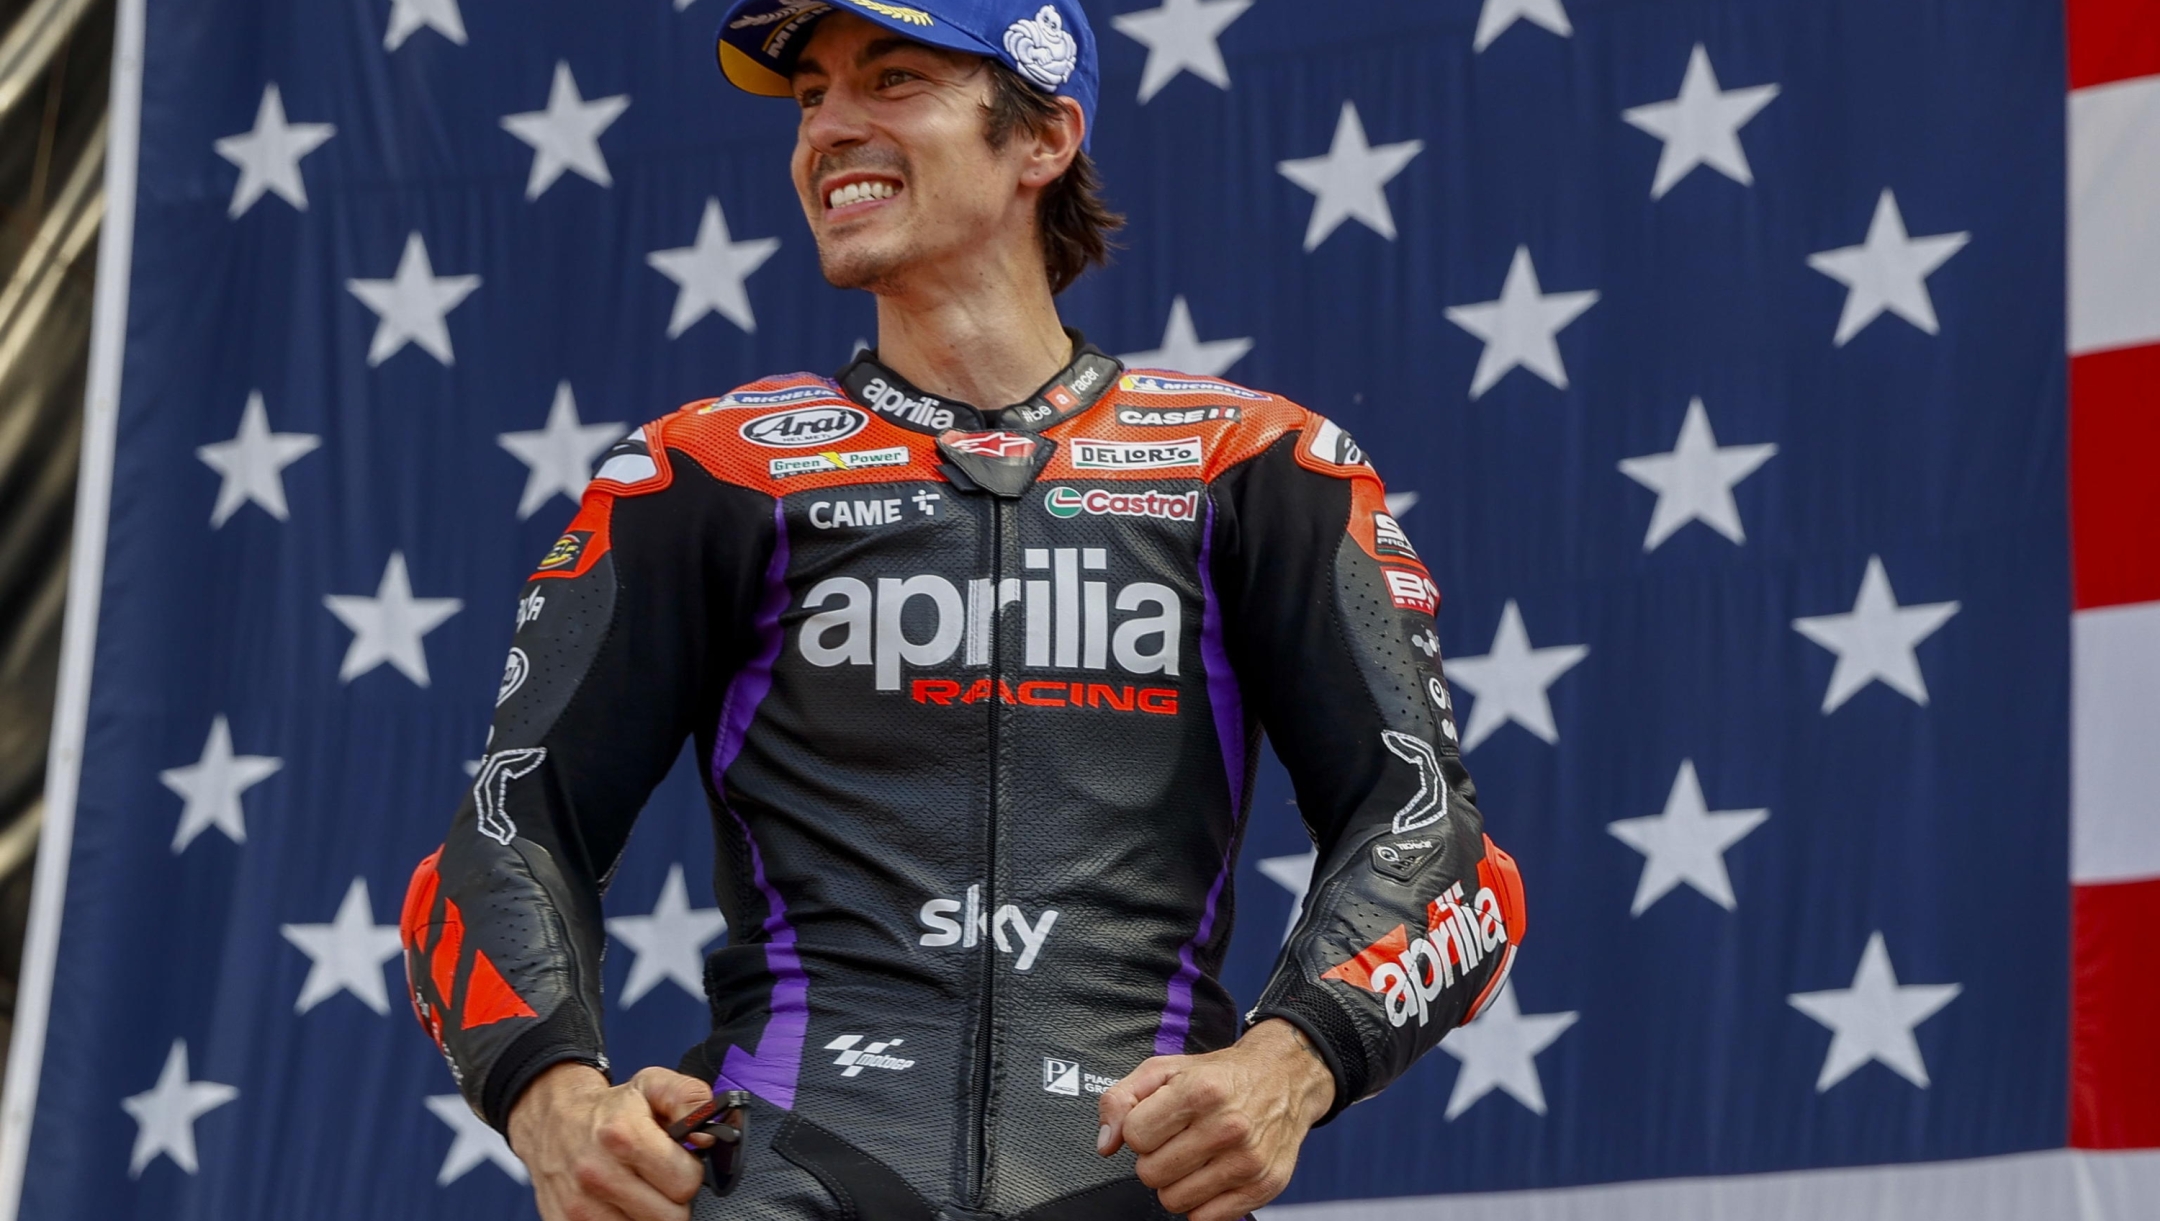 epa11277361 Spanish rider Mavrick Vinales of the Aprilia Racing Team flexes for the crowd after winning  the Sprint Race of the MotoGP category for the Motorcycling Grand Prix of The Americas at the Circuit of The Americas in Austin, Texas, USA, 13 April 2024  EPA/ADAM DAVIS